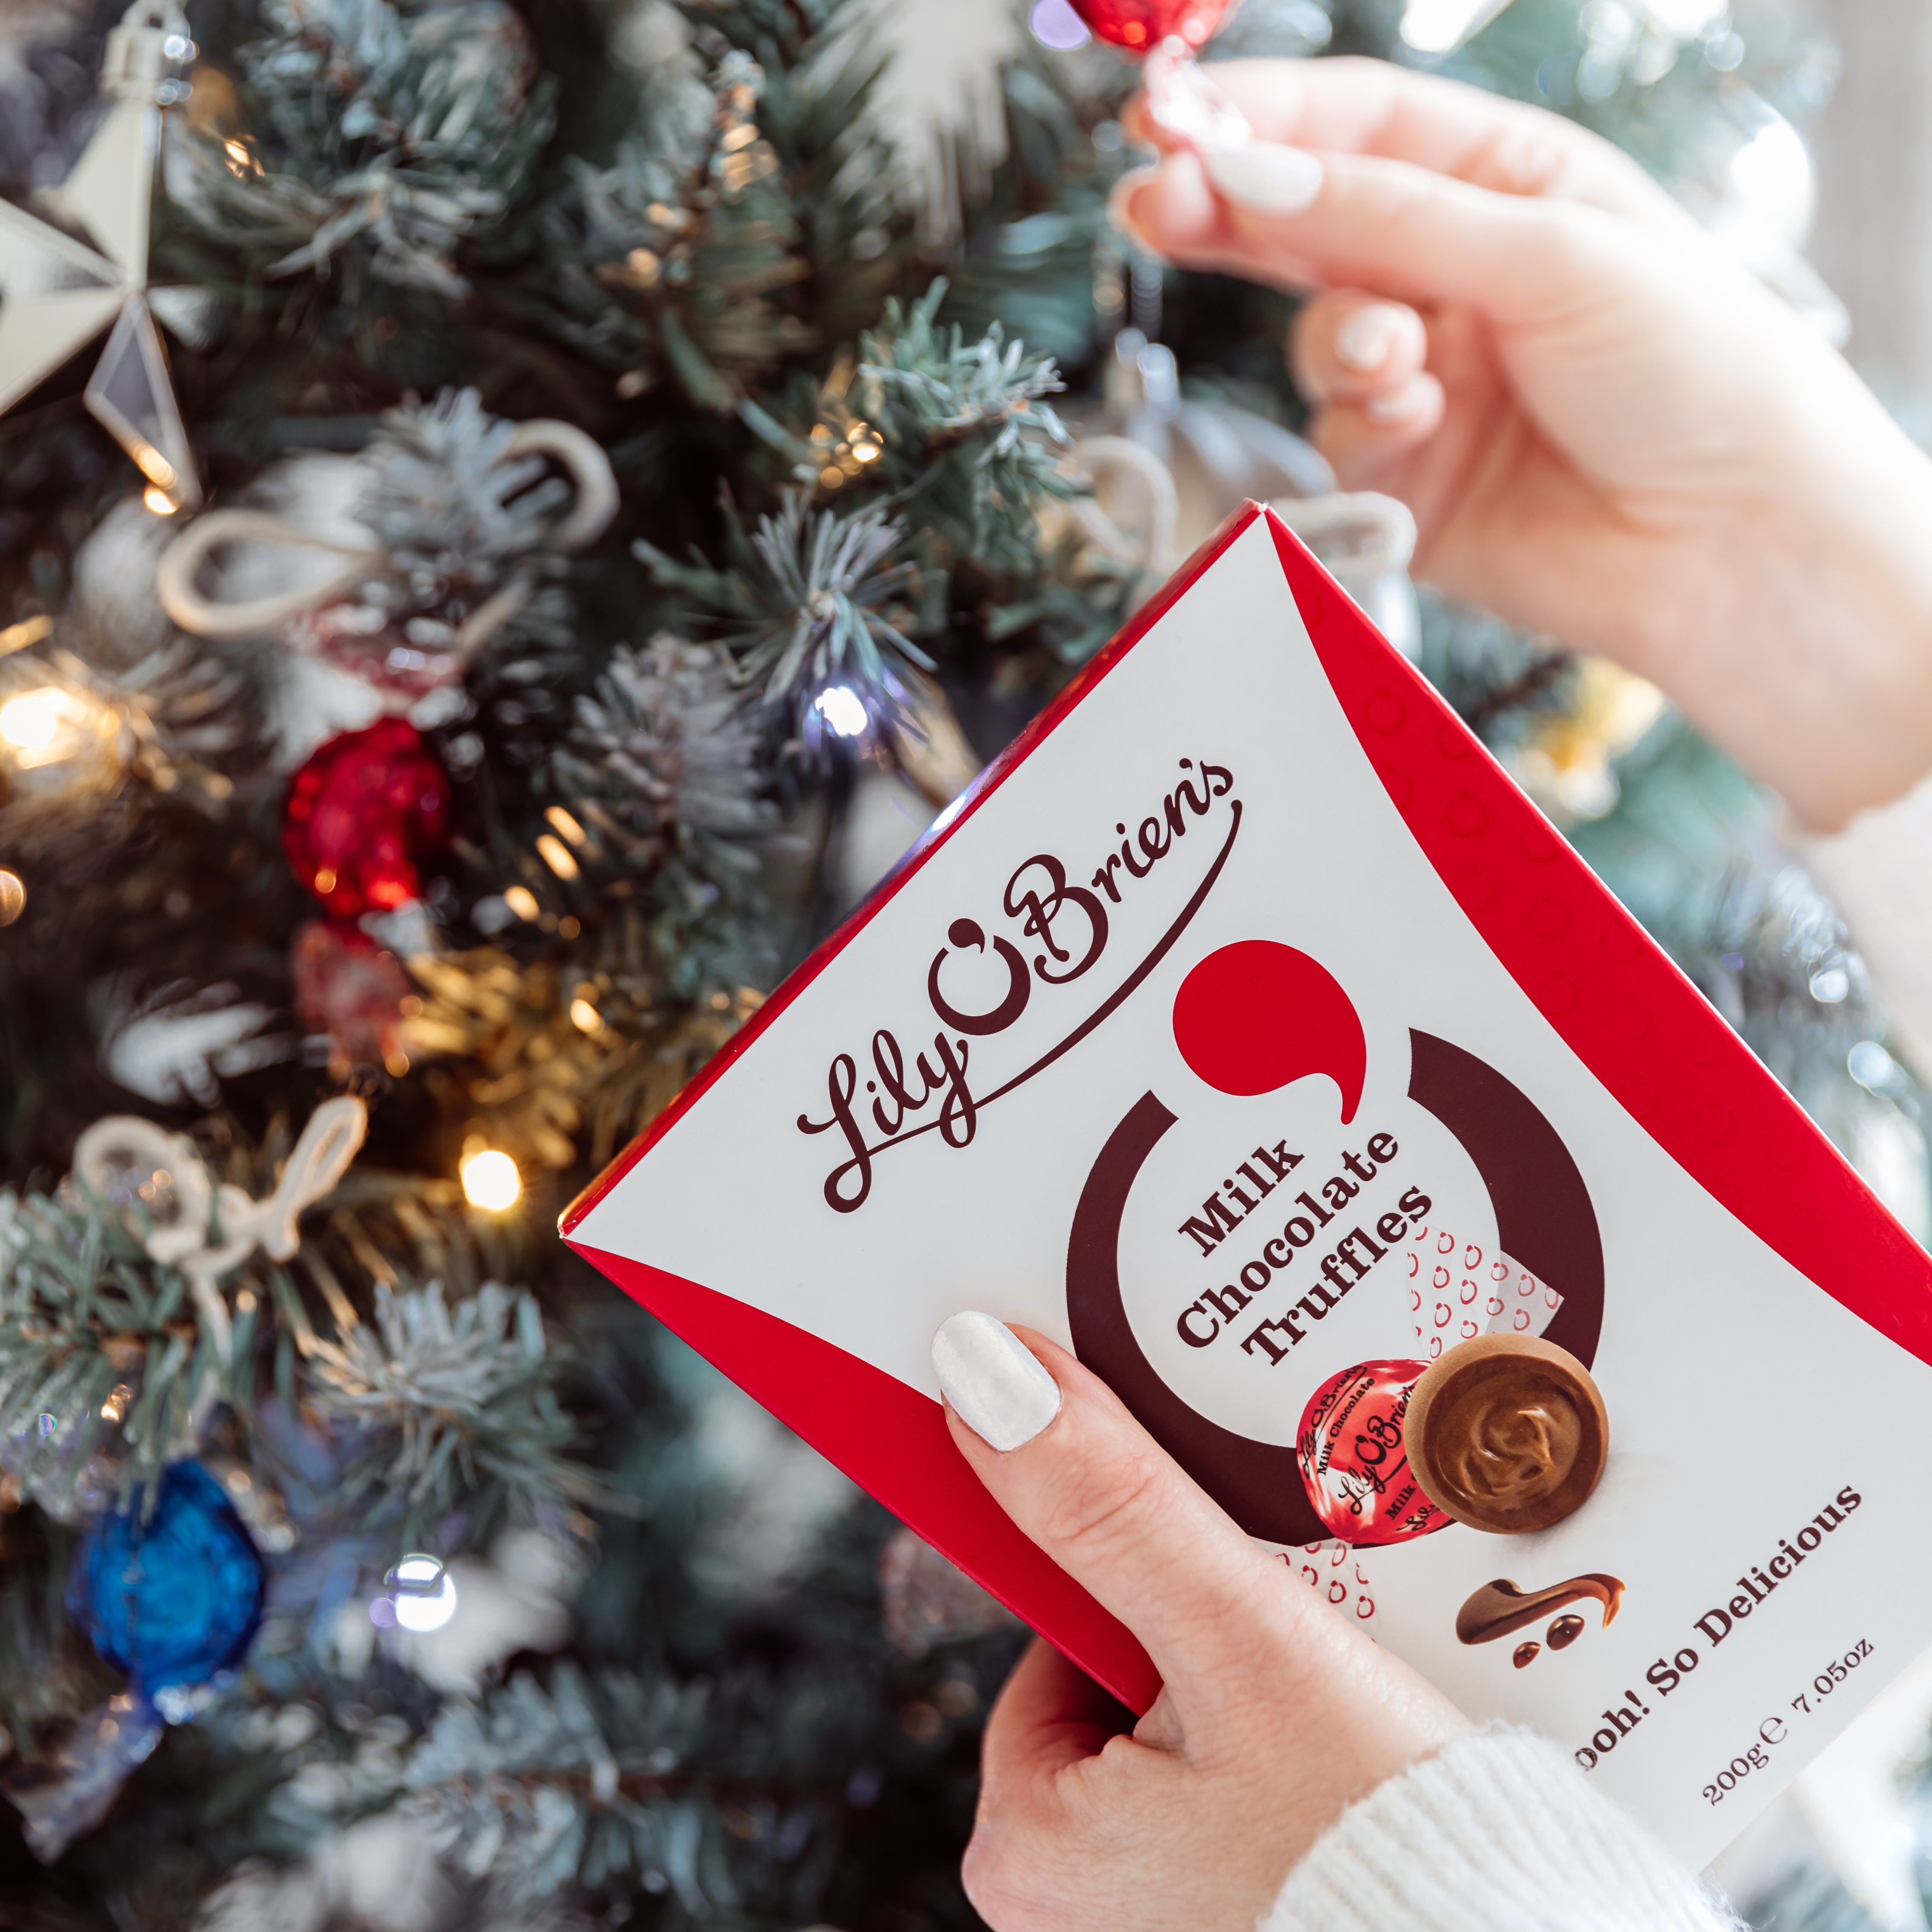 Creative ways to use extra chocolate at Christmas (if you have any left… if not, buy extra!)